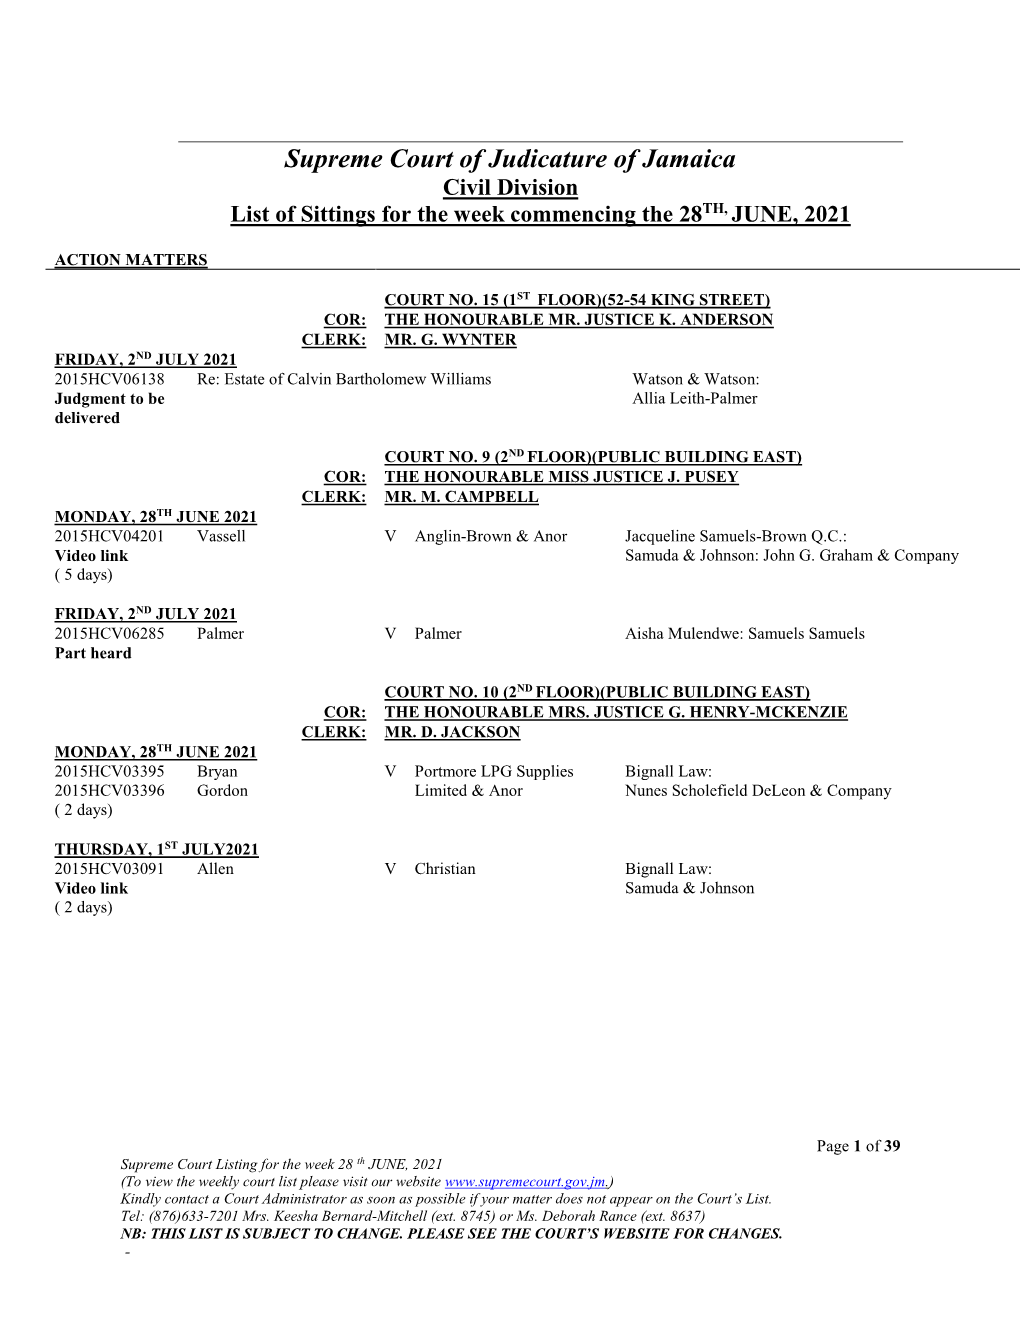 Civil Division List of Sittings for the Week Commencing the 28TH, JUNE, 2021